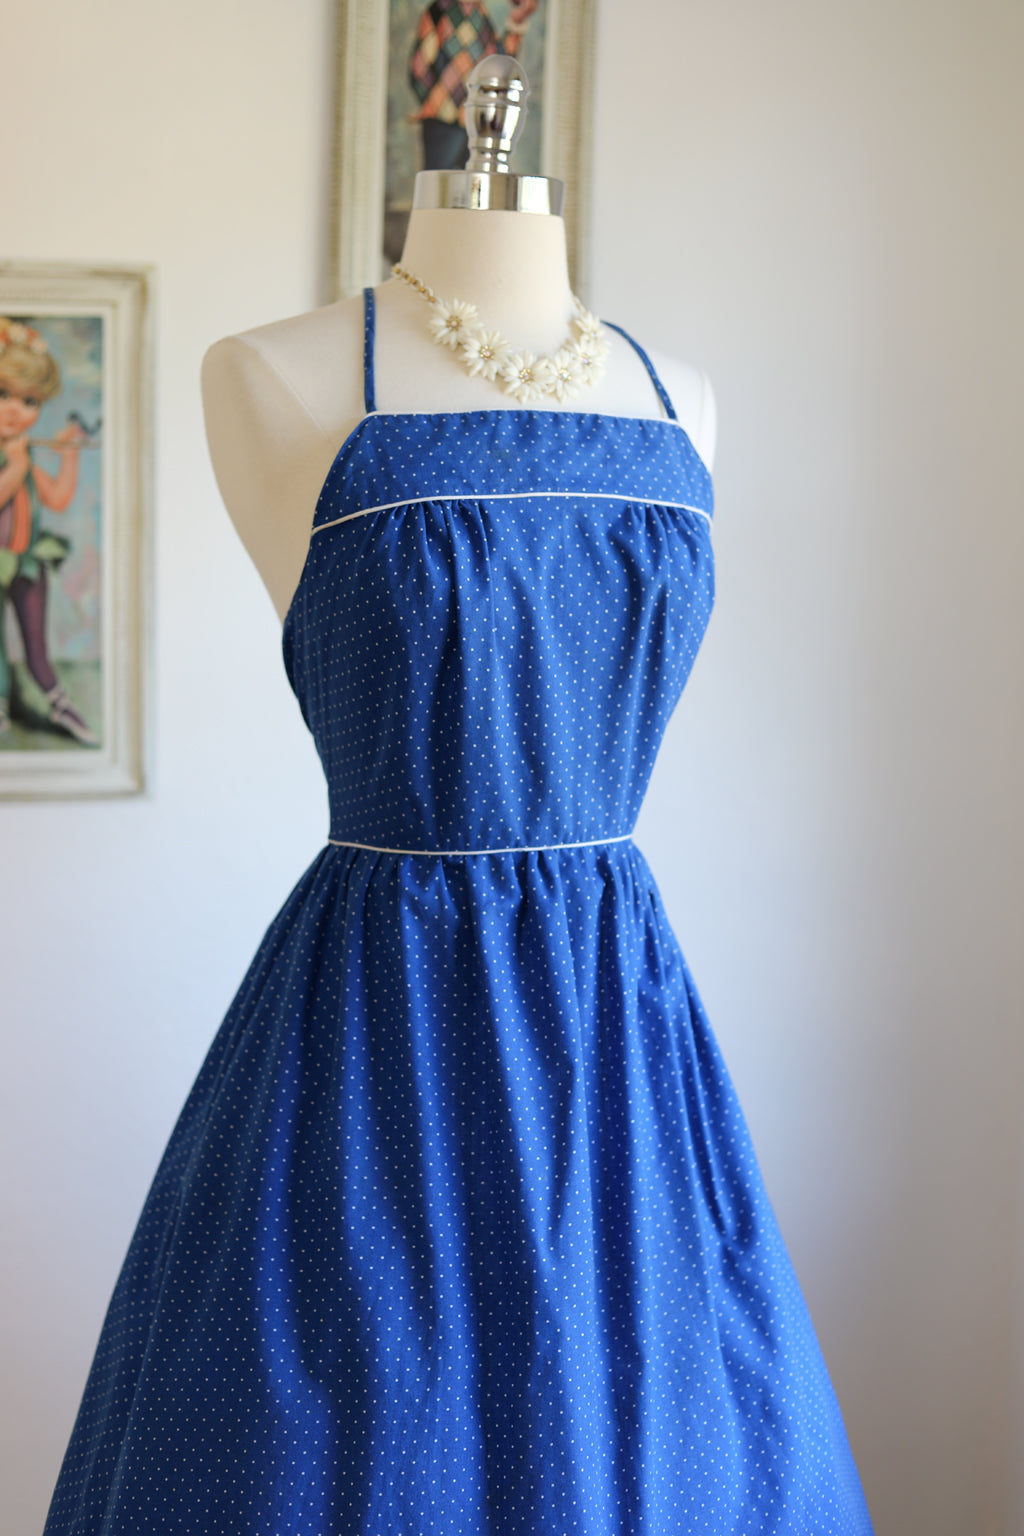 Vintage 1970s to 1980s Byer Too Dress - Blue White Polka Dot Print Rear Lace-up Cotton Blend Sundress Size XS or S